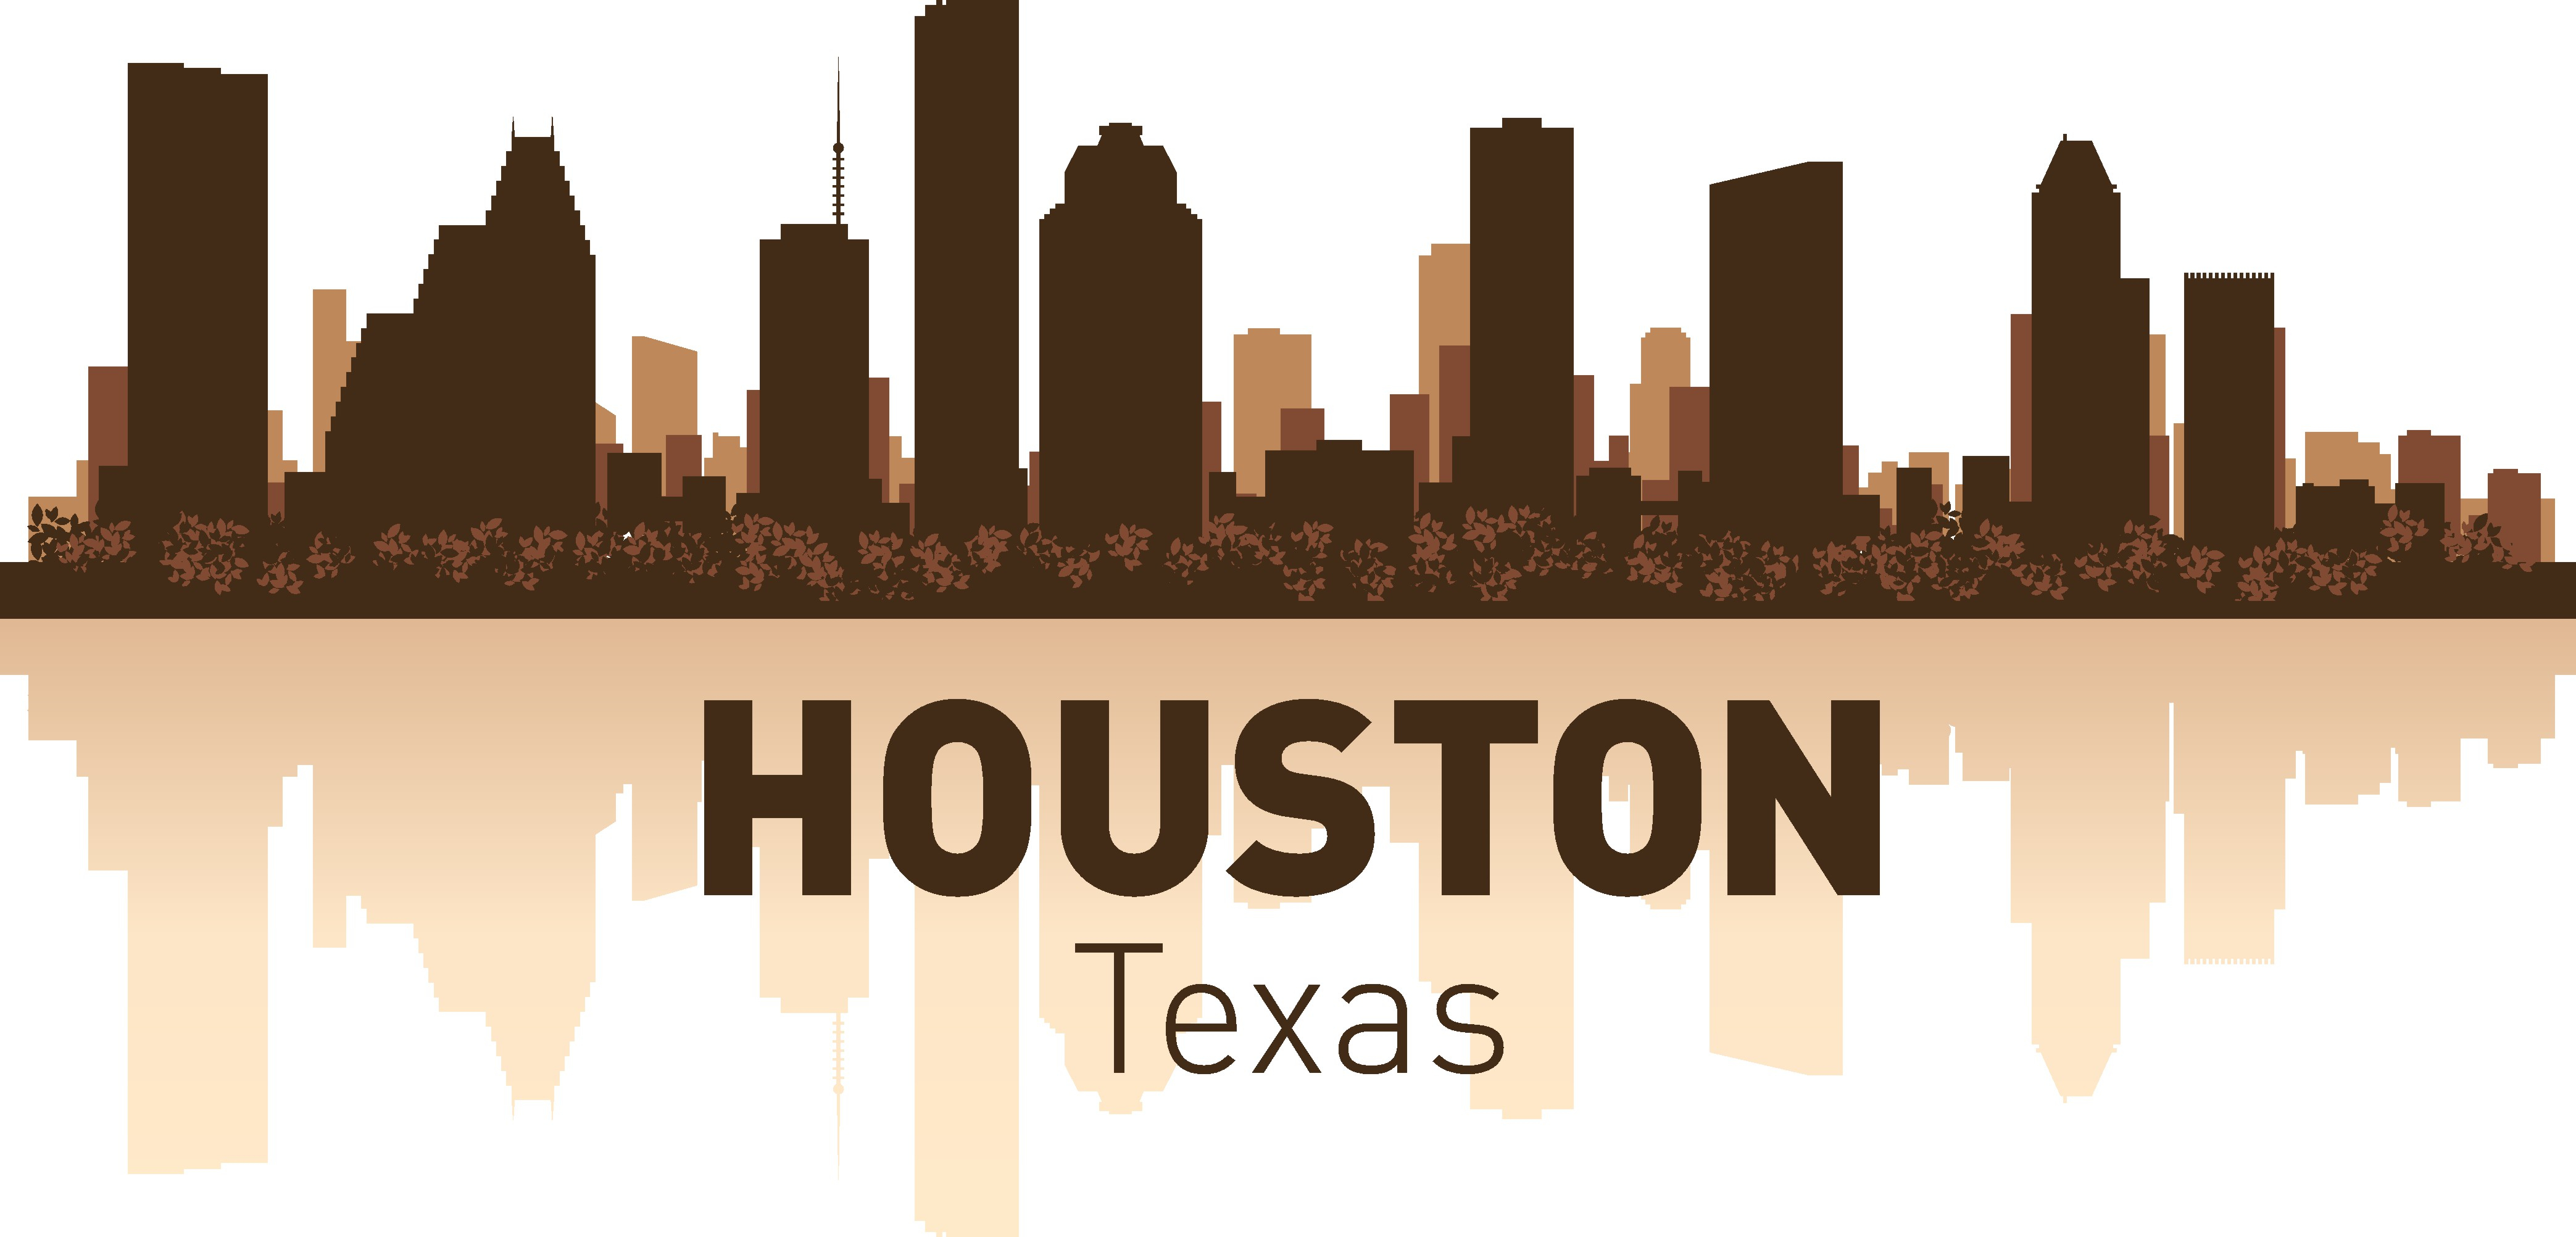 895 Houston Skyline Silhouette Images, Stock Photos, 3D objects, & Vectors